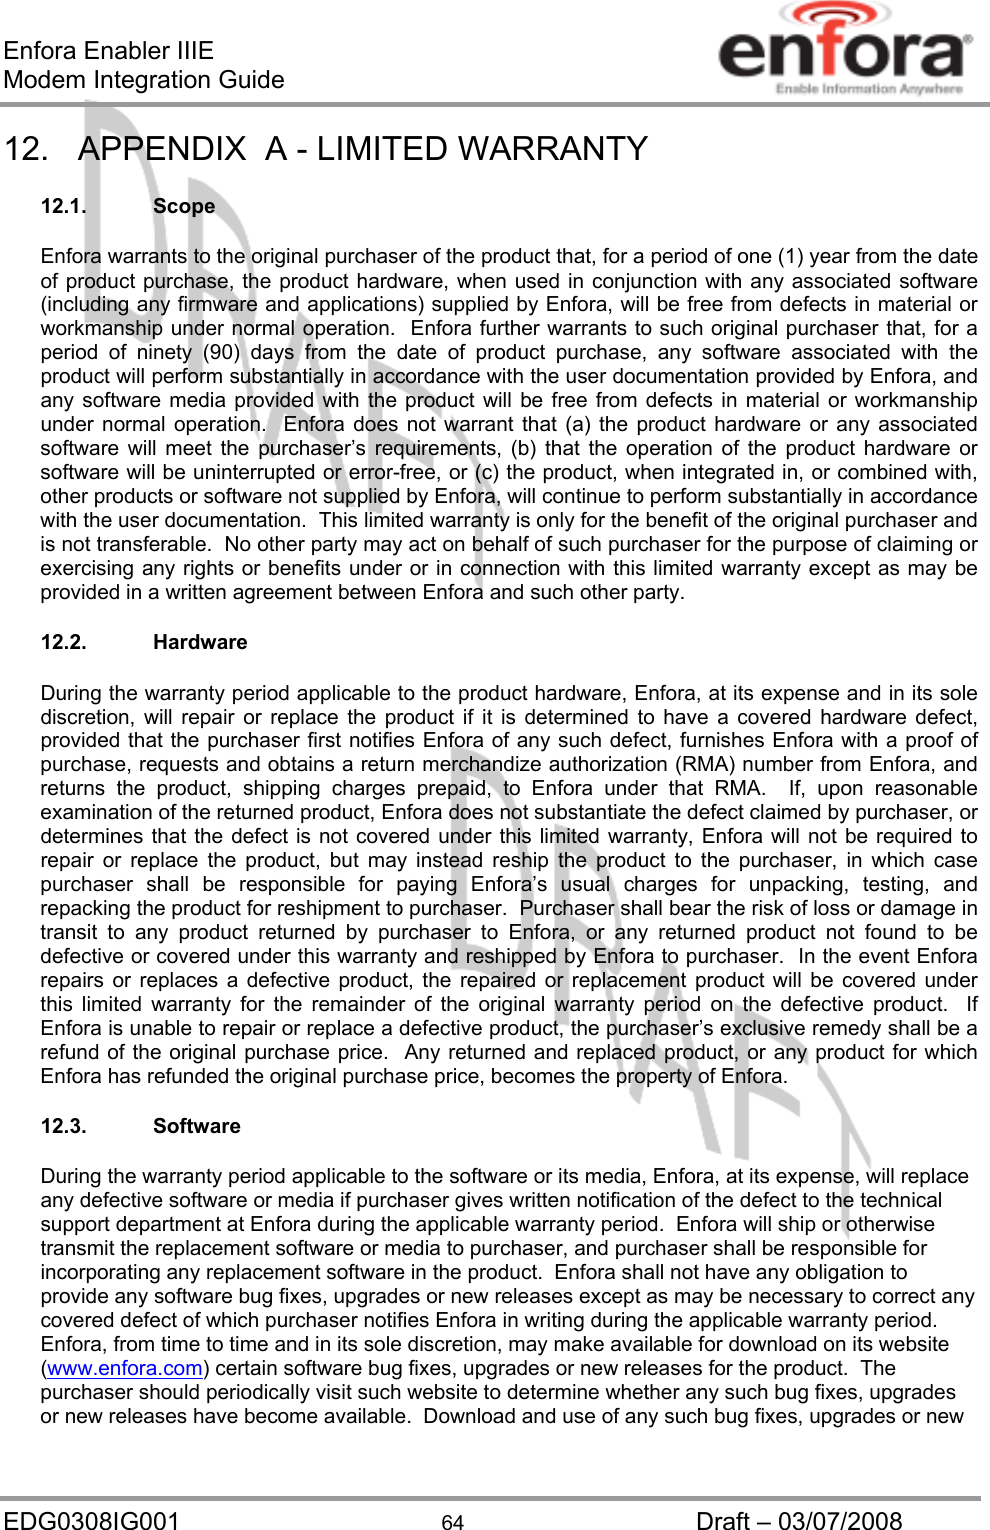 Enfora Enabler IIIE Modem Integration Guide EDG0308IG001  64  Draft – 03/07/2008 12.  APPENDIX  A - LIMITED WARRANTY  12.1. Scope  Enfora warrants to the original purchaser of the product that, for a period of one (1) year from the date of product purchase, the product hardware, when used in conjunction with any associated software (including any firmware and applications) supplied by Enfora, will be free from defects in material or workmanship under normal operation.  Enfora further warrants to such original purchaser that, for a period of ninety (90) days from the date of product purchase, any software associated with the product will perform substantially in accordance with the user documentation provided by Enfora, and any software media provided with the product will be free from defects in material or workmanship under normal operation.  Enfora does not warrant that (a) the product hardware or any associated software will meet the purchaser’s requirements, (b) that the operation of the product hardware or software will be uninterrupted or error-free, or (c) the product, when integrated in, or combined with, other products or software not supplied by Enfora, will continue to perform substantially in accordance with the user documentation.  This limited warranty is only for the benefit of the original purchaser and is not transferable.  No other party may act on behalf of such purchaser for the purpose of claiming or exercising any rights or benefits under or in connection with this limited warranty except as may be provided in a written agreement between Enfora and such other party.  12.2. Hardware  During the warranty period applicable to the product hardware, Enfora, at its expense and in its sole discretion, will repair or replace the product if it is determined to have a covered hardware defect, provided that the purchaser first notifies Enfora of any such defect, furnishes Enfora with a proof of purchase, requests and obtains a return merchandize authorization (RMA) number from Enfora, and returns the product, shipping charges prepaid, to Enfora under that RMA.  If, upon reasonable examination of the returned product, Enfora does not substantiate the defect claimed by purchaser, or determines that the defect is not covered under this limited warranty, Enfora will not be required to repair or replace the product, but may instead reship the product to the purchaser, in which case purchaser shall be responsible for paying Enfora’s usual charges for unpacking, testing, and repacking the product for reshipment to purchaser.  Purchaser shall bear the risk of loss or damage in transit to any product returned by purchaser to Enfora, or any returned product not found to be defective or covered under this warranty and reshipped by Enfora to purchaser.  In the event Enfora repairs or replaces a defective product, the repaired or replacement product will be covered under this limited warranty for the remainder of the original warranty period on the defective product.  If Enfora is unable to repair or replace a defective product, the purchaser’s exclusive remedy shall be a refund of the original purchase price.  Any returned and replaced product, or any product for which Enfora has refunded the original purchase price, becomes the property of Enfora.  12.3. Software  During the warranty period applicable to the software or its media, Enfora, at its expense, will replace any defective software or media if purchaser gives written notification of the defect to the technical support department at Enfora during the applicable warranty period.  Enfora will ship or otherwise transmit the replacement software or media to purchaser, and purchaser shall be responsible for incorporating any replacement software in the product.  Enfora shall not have any obligation to provide any software bug fixes, upgrades or new releases except as may be necessary to correct any covered defect of which purchaser notifies Enfora in writing during the applicable warranty period.  Enfora, from time to time and in its sole discretion, may make available for download on its website (www.enfora.com) certain software bug fixes, upgrades or new releases for the product.  The purchaser should periodically visit such website to determine whether any such bug fixes, upgrades or new releases have become available.  Download and use of any such bug fixes, upgrades or new 